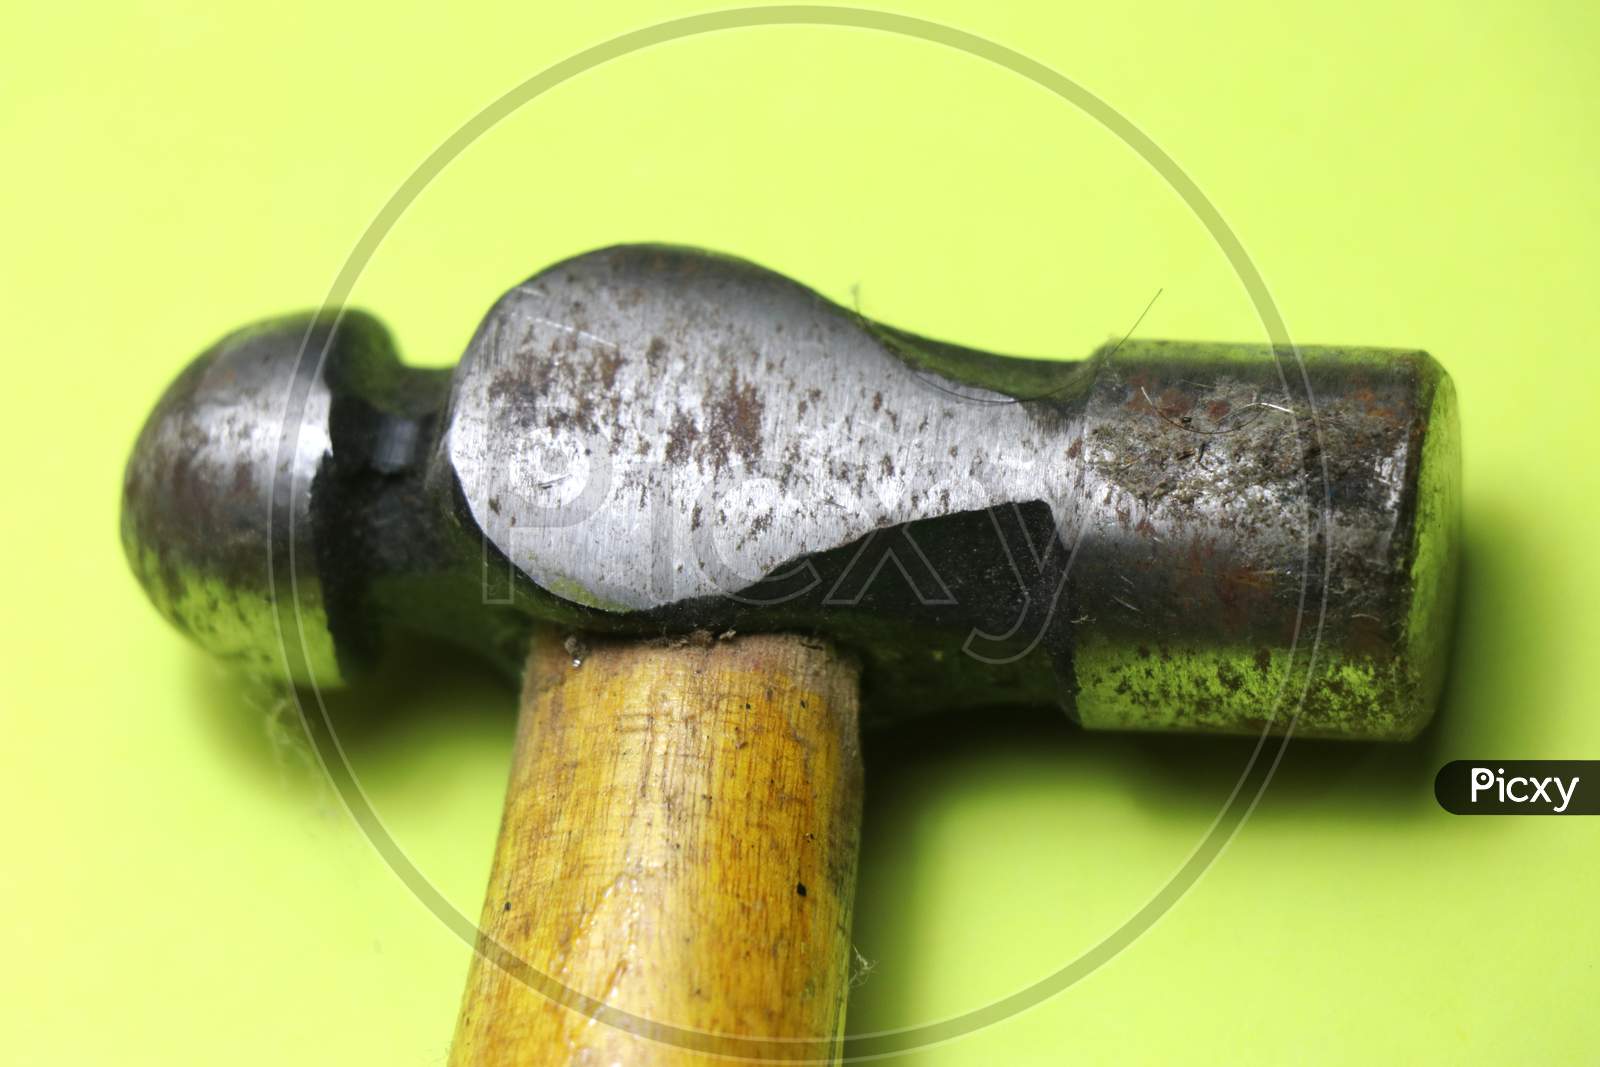 Close Up Of Ball Peen Hammer With Wooden Handle